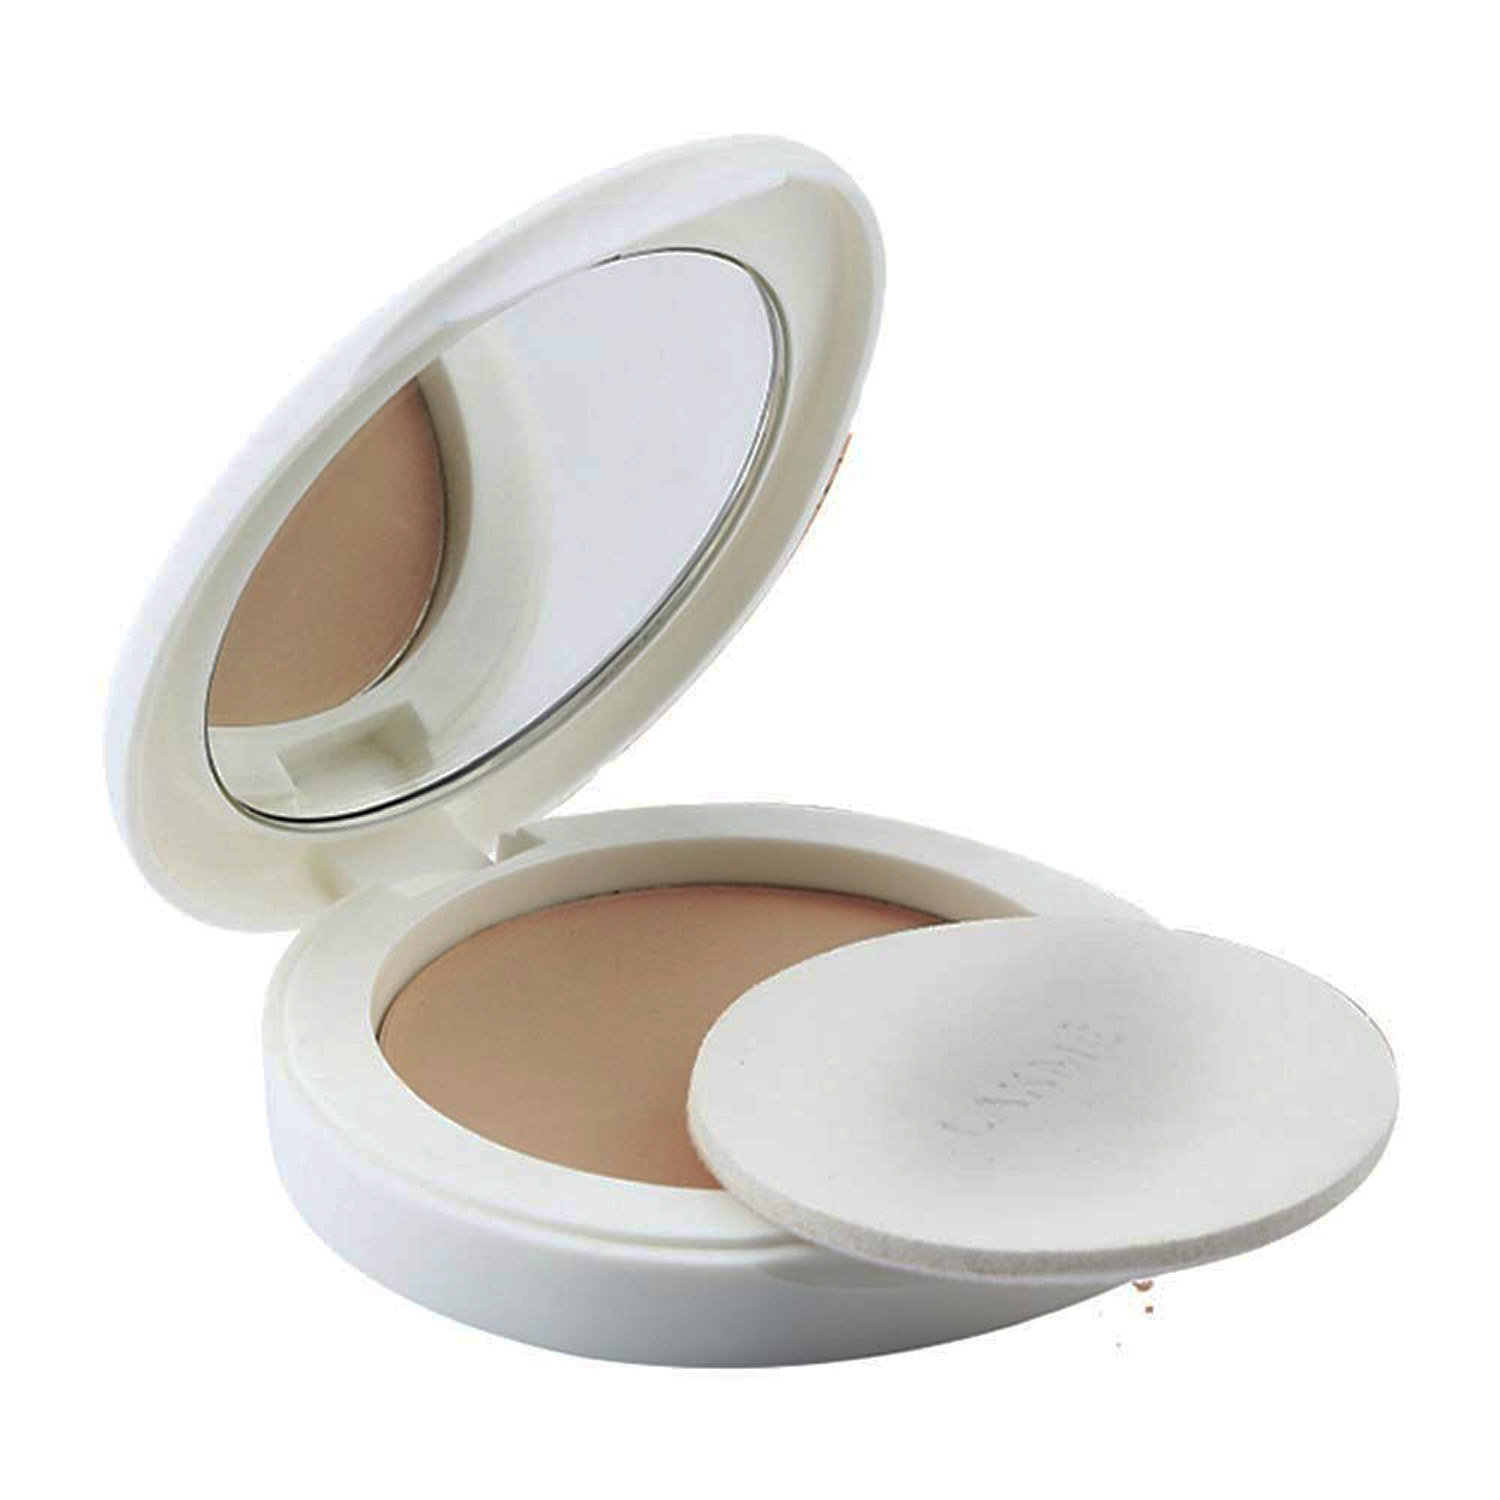 Lakme Perfect Radiance Compact, 8gm-Beige Honey 05